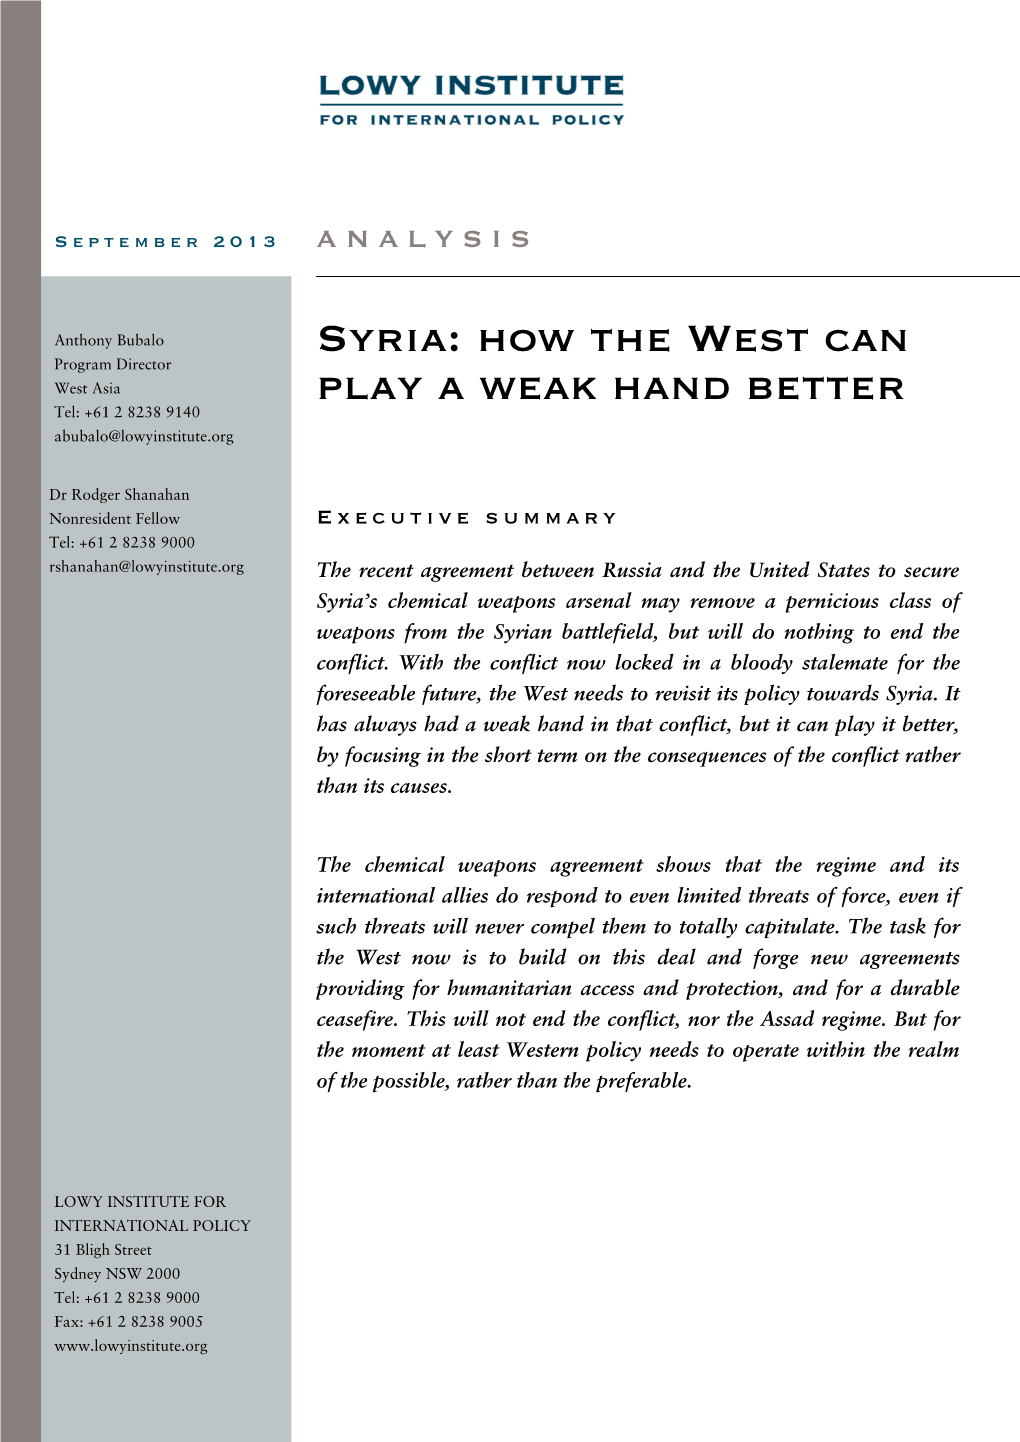 Syria: How the West Can Program Director West Asia Play a Weak Hand Better Tel: +61 2 8238 9140 Abubalo@Lowyinstitute.Org